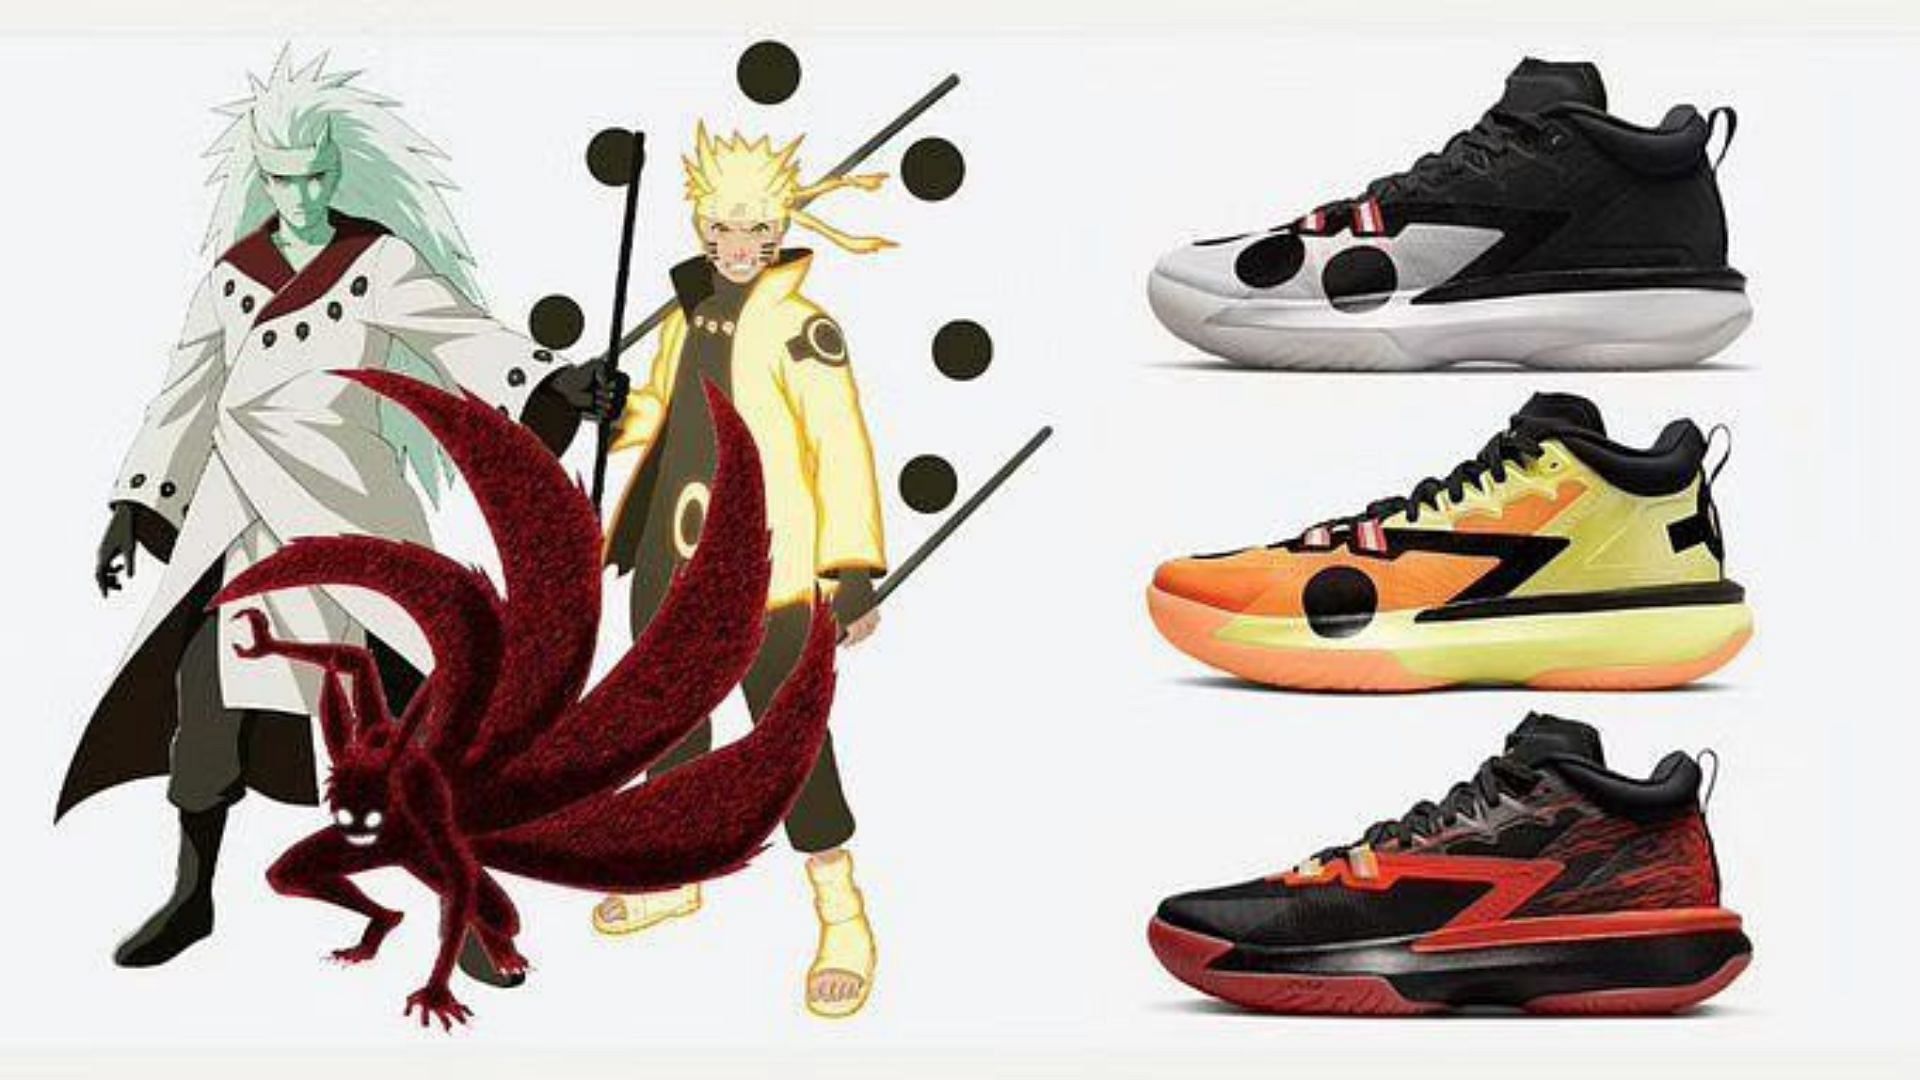 Here's a closer look at the three colors in the Naruto collection (image via eGames.news)